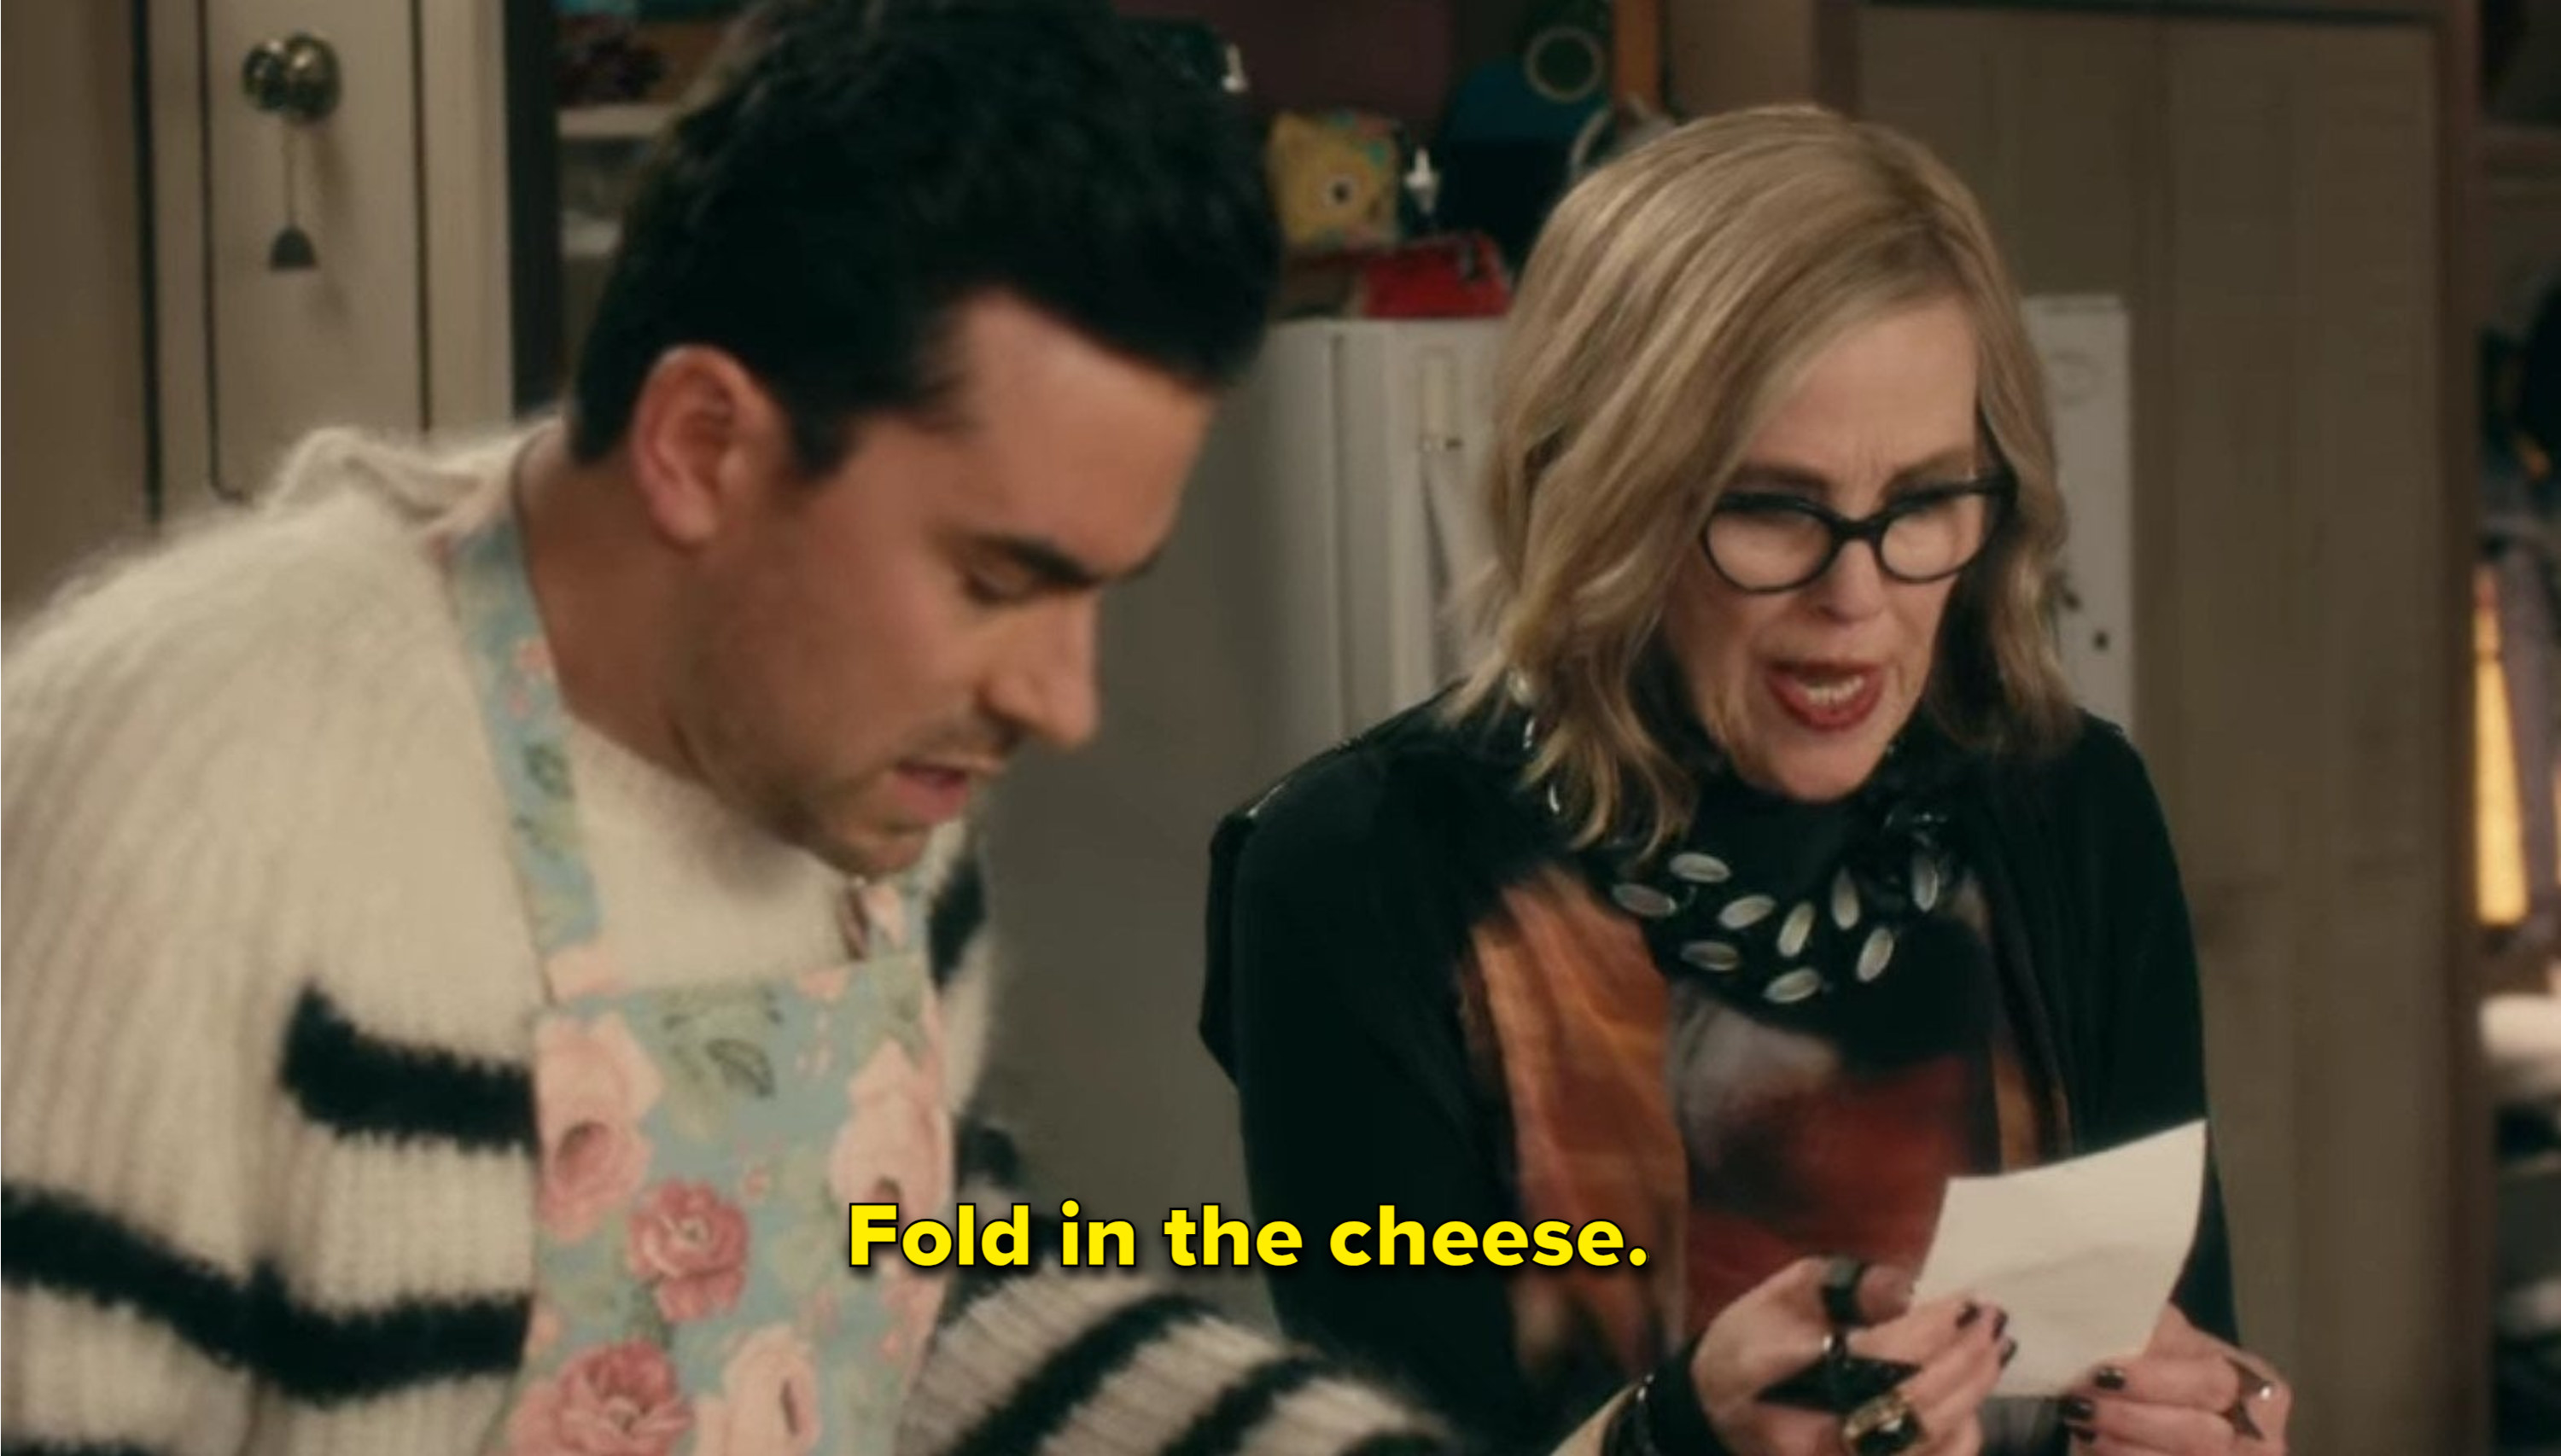 Moira says &quot;Fold in the cheese&quot;